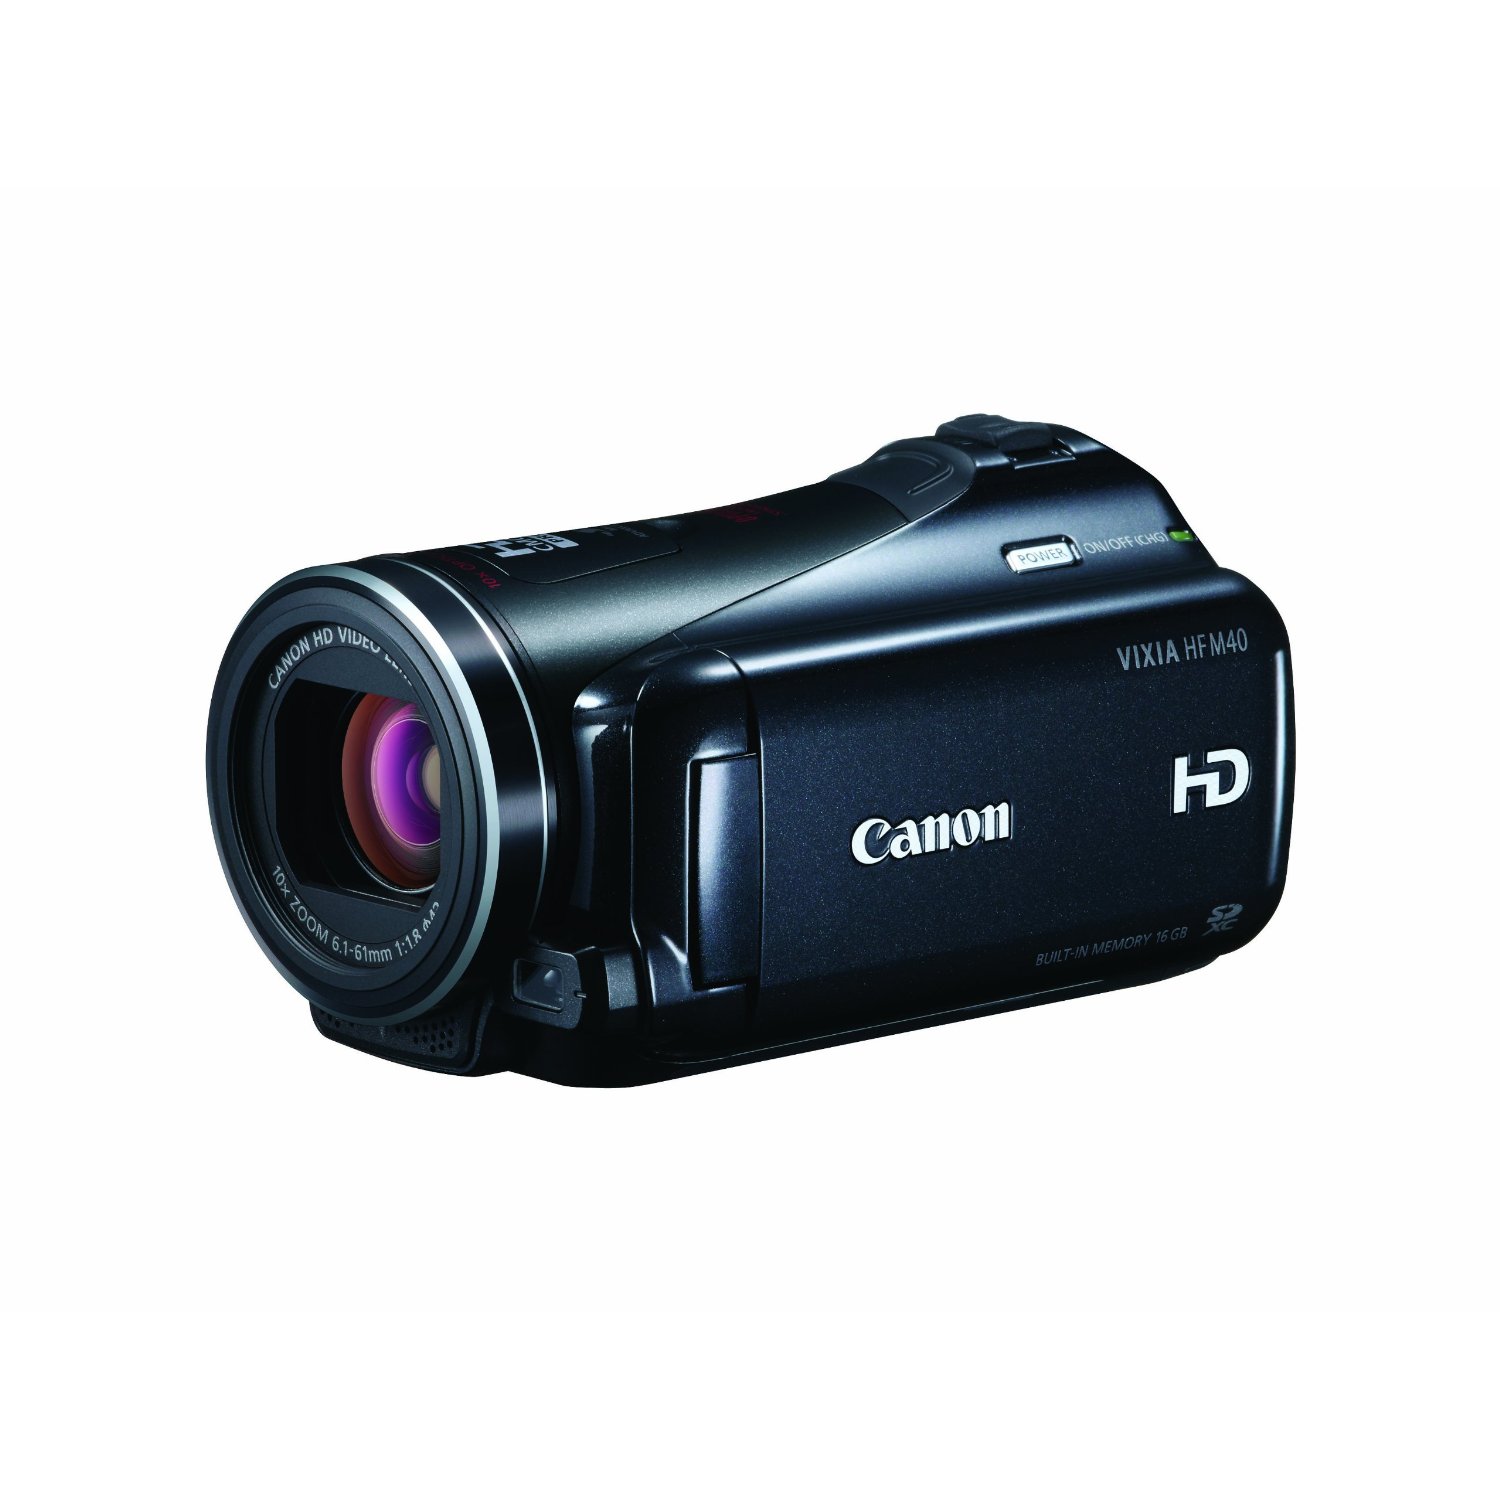 http://thetechjournal.com/wp-content/uploads/images/1111/1320777175-canon-vixia-hf-m40-full-hd-camcorder-with-hd-cmos-pro-2.jpg